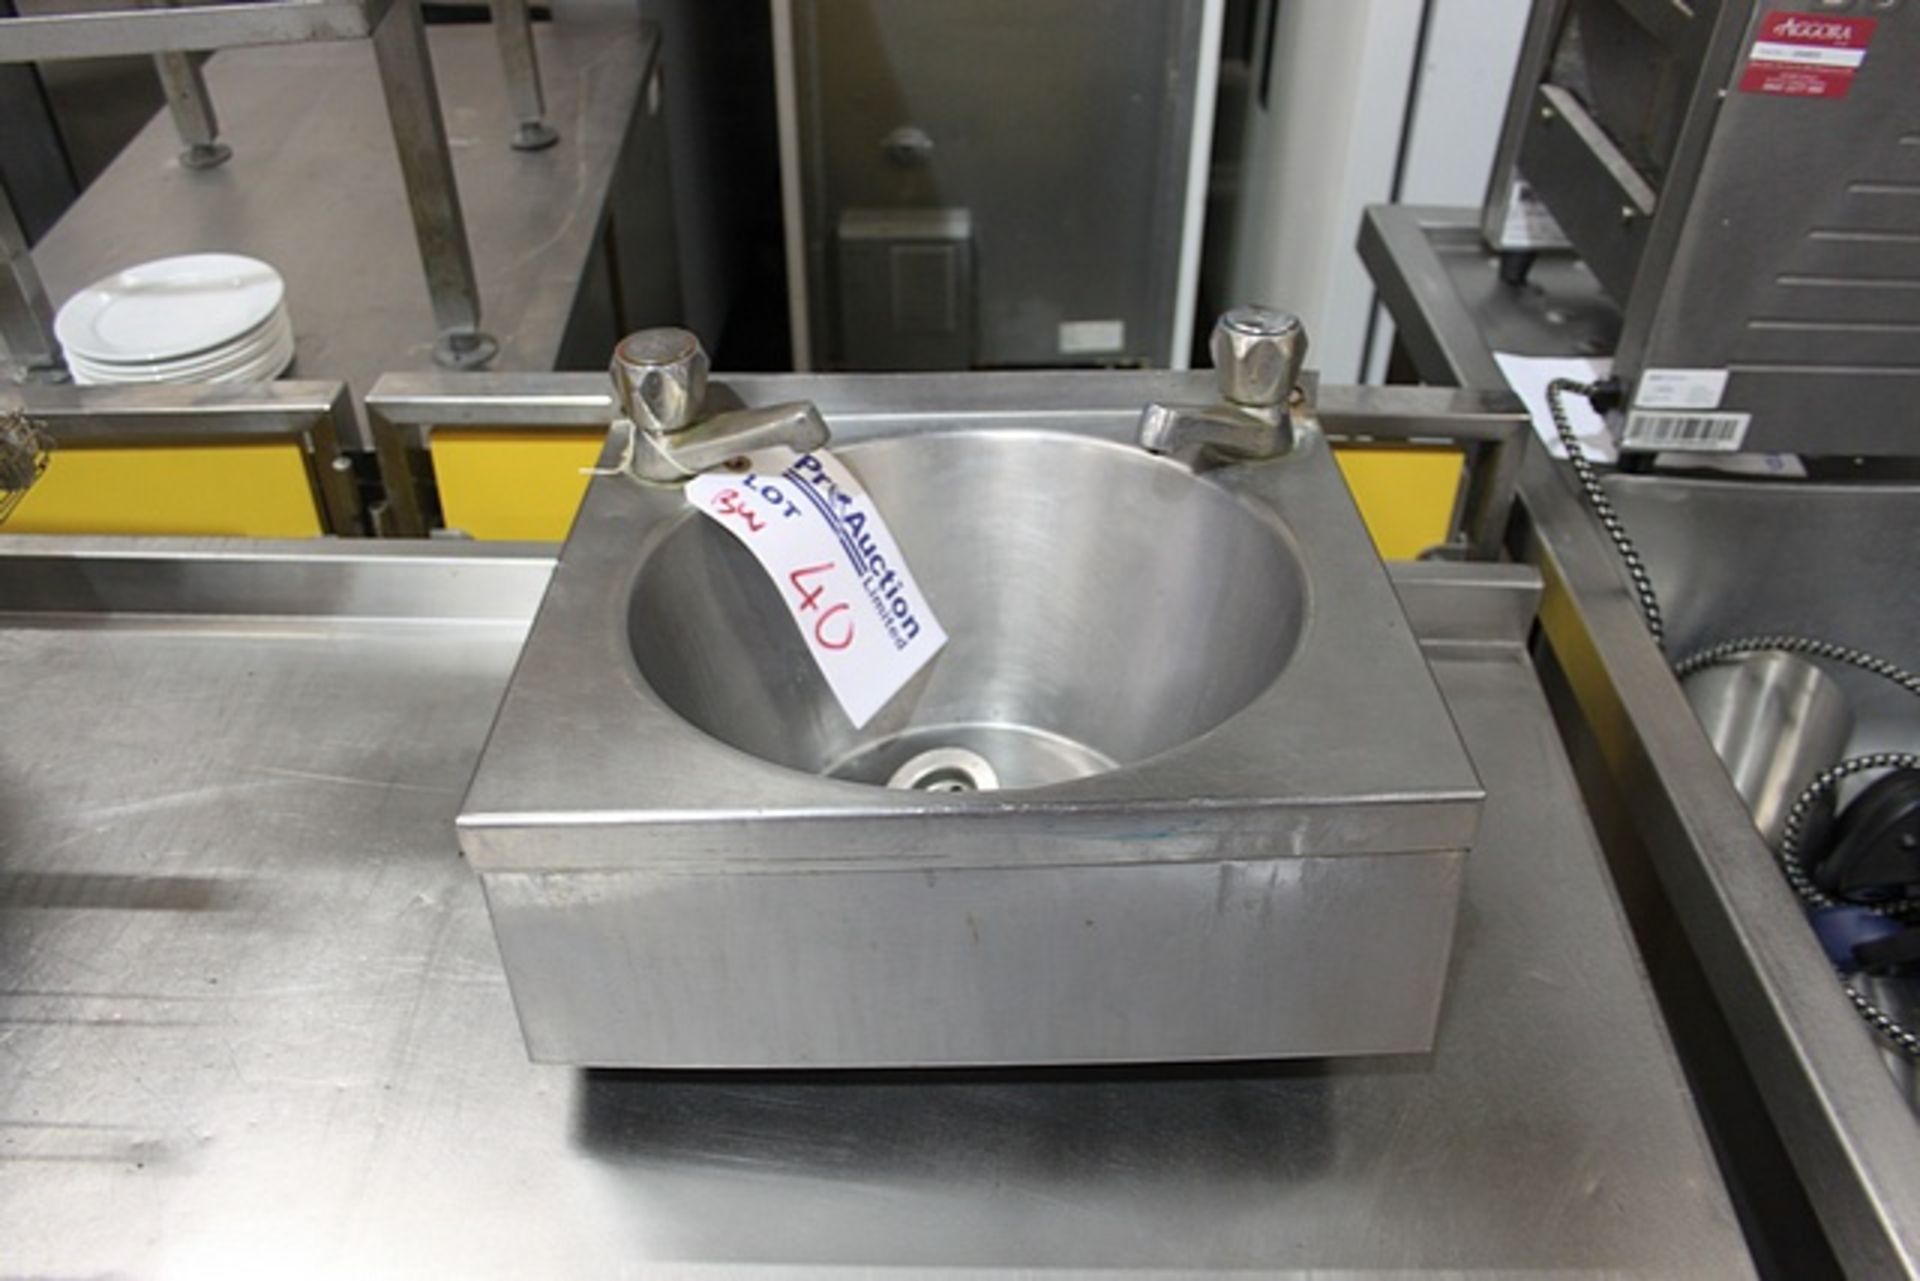 Stainless steel hand wash sink basin 390mm x 350mm x 240mm